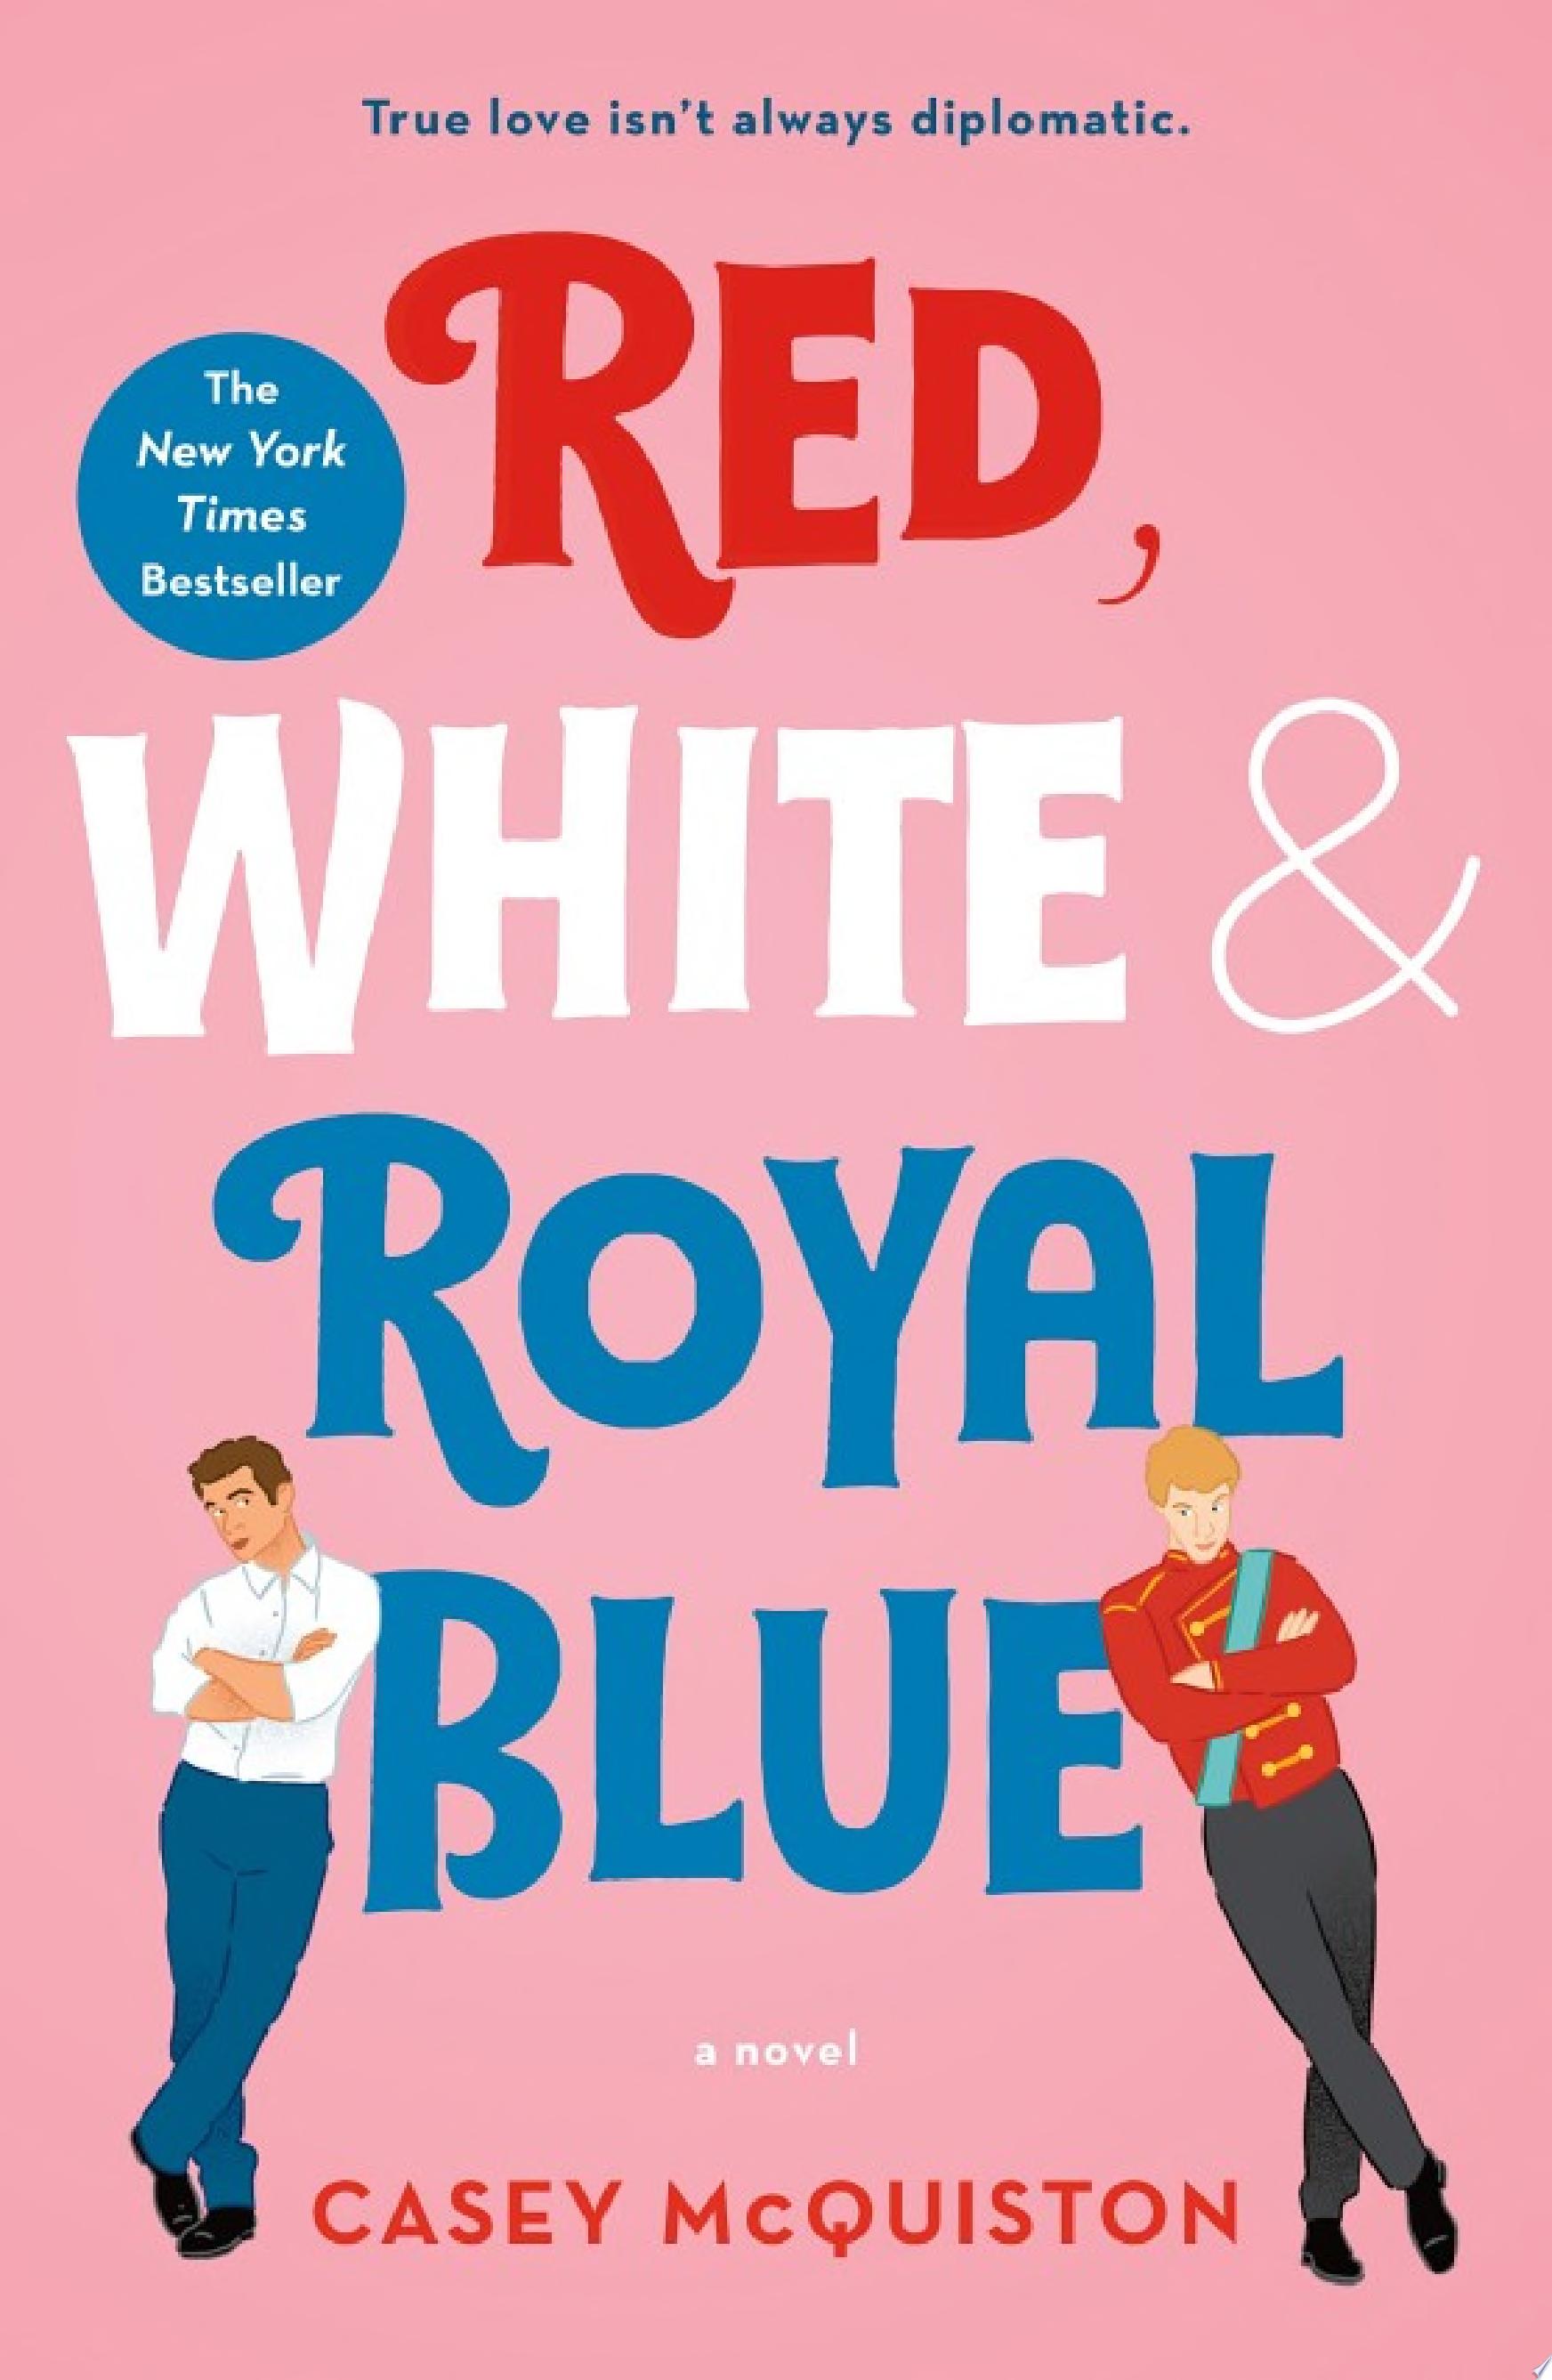 Image for "Red, White & Royal Blue"